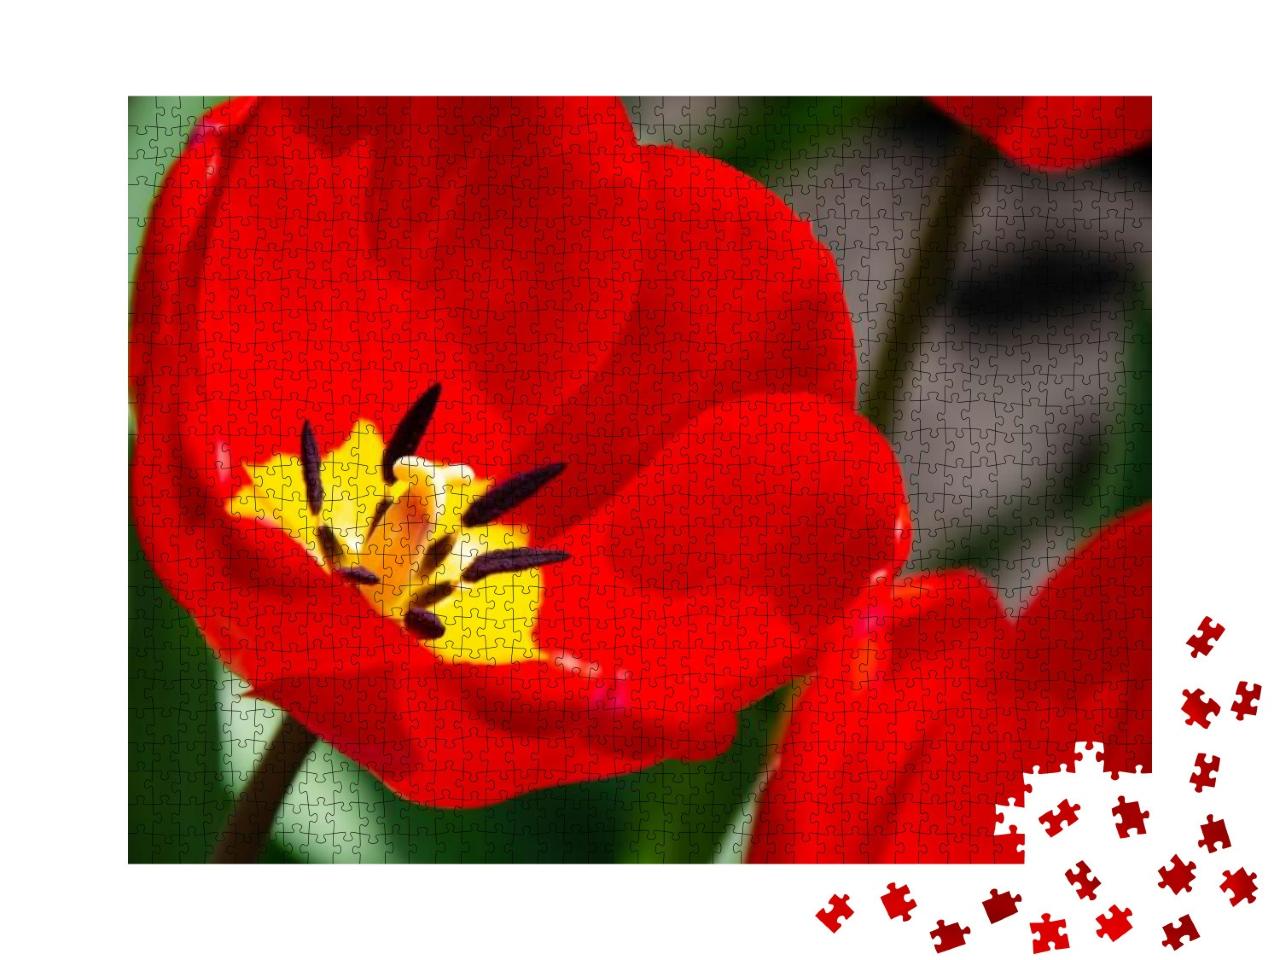 Details of Inner Tulip Flower with Pistil & Stamen. Close... Jigsaw Puzzle with 1000 pieces